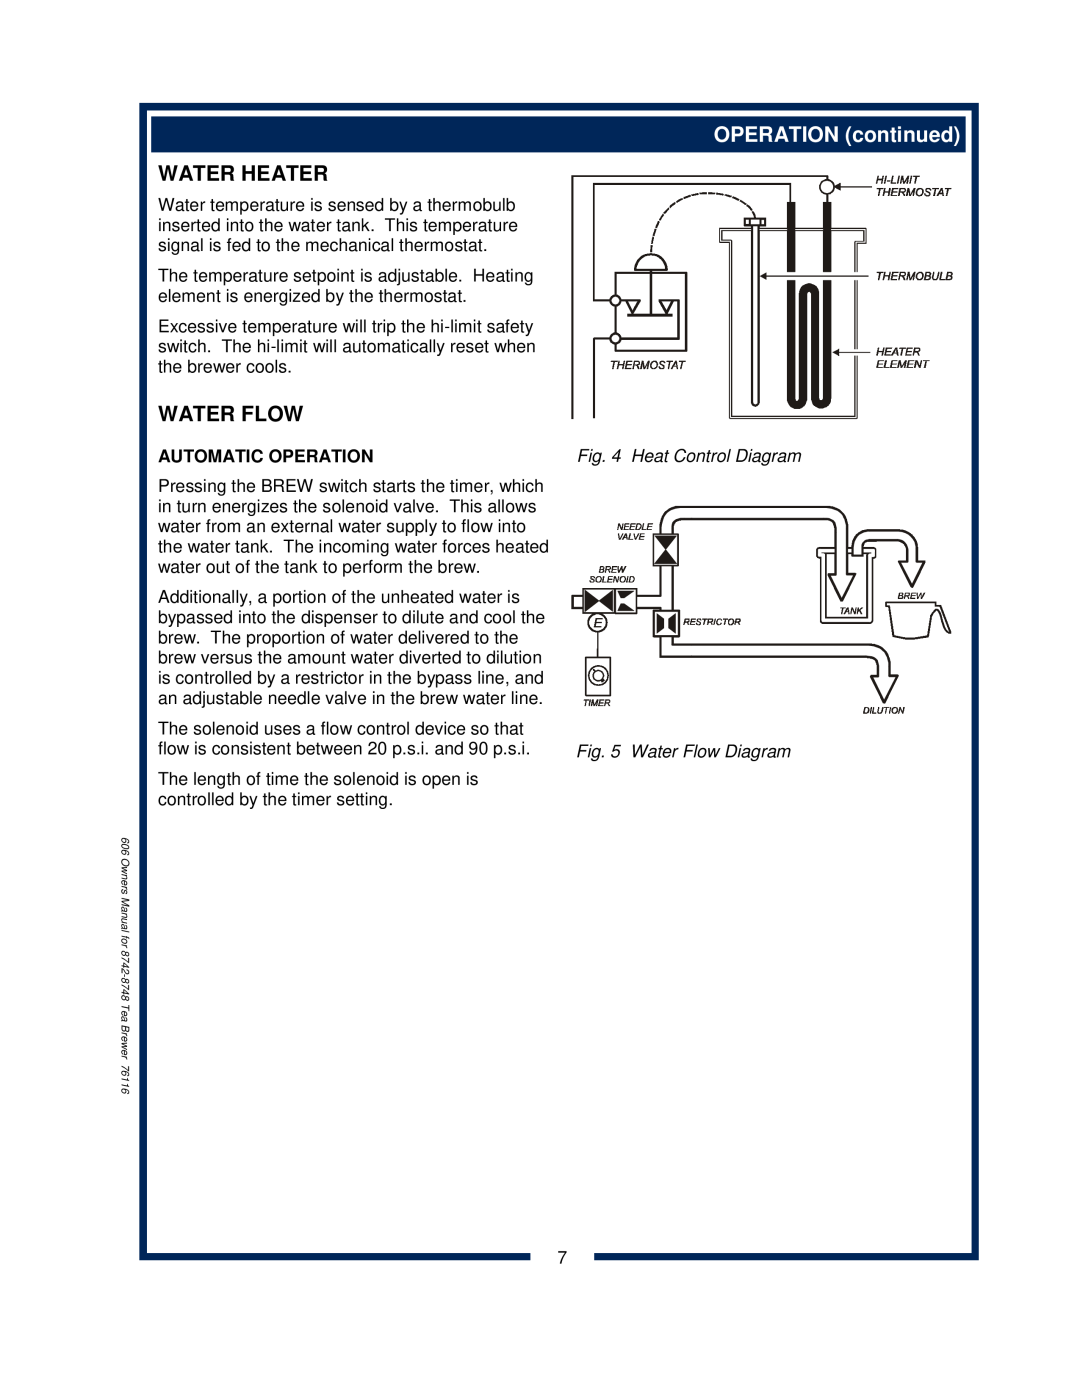 Bloomfield 8742 OPERATION continued, Water Heater, Automatic Operation, Water Flow Diagram, Heat Control Diagram 